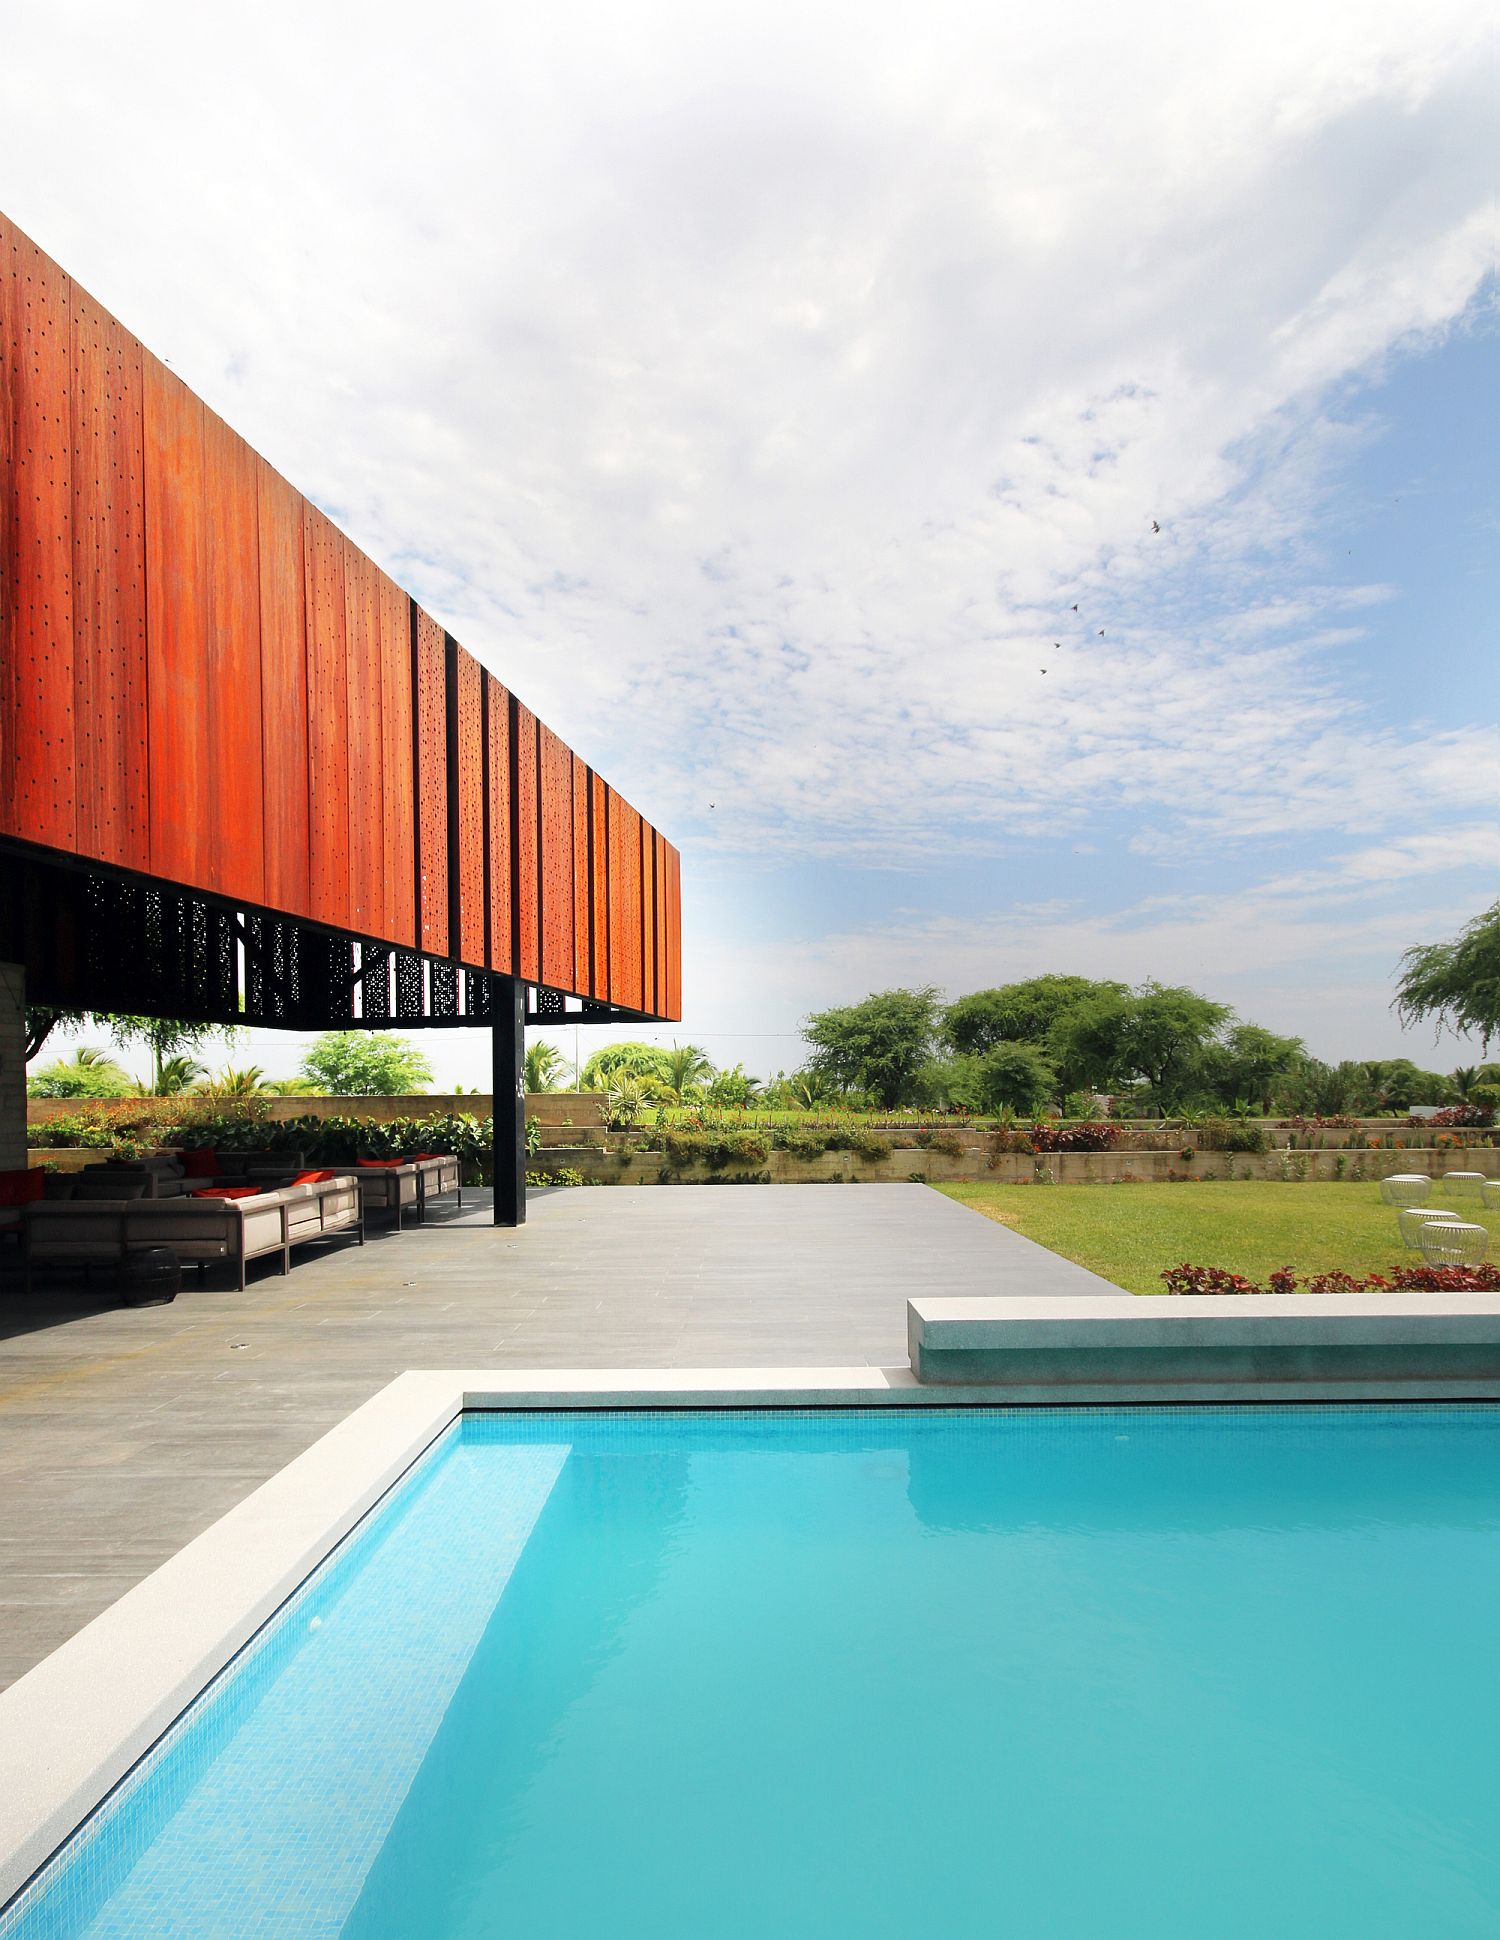 Pool area and outdoor ranch at the Peruvian holiday home